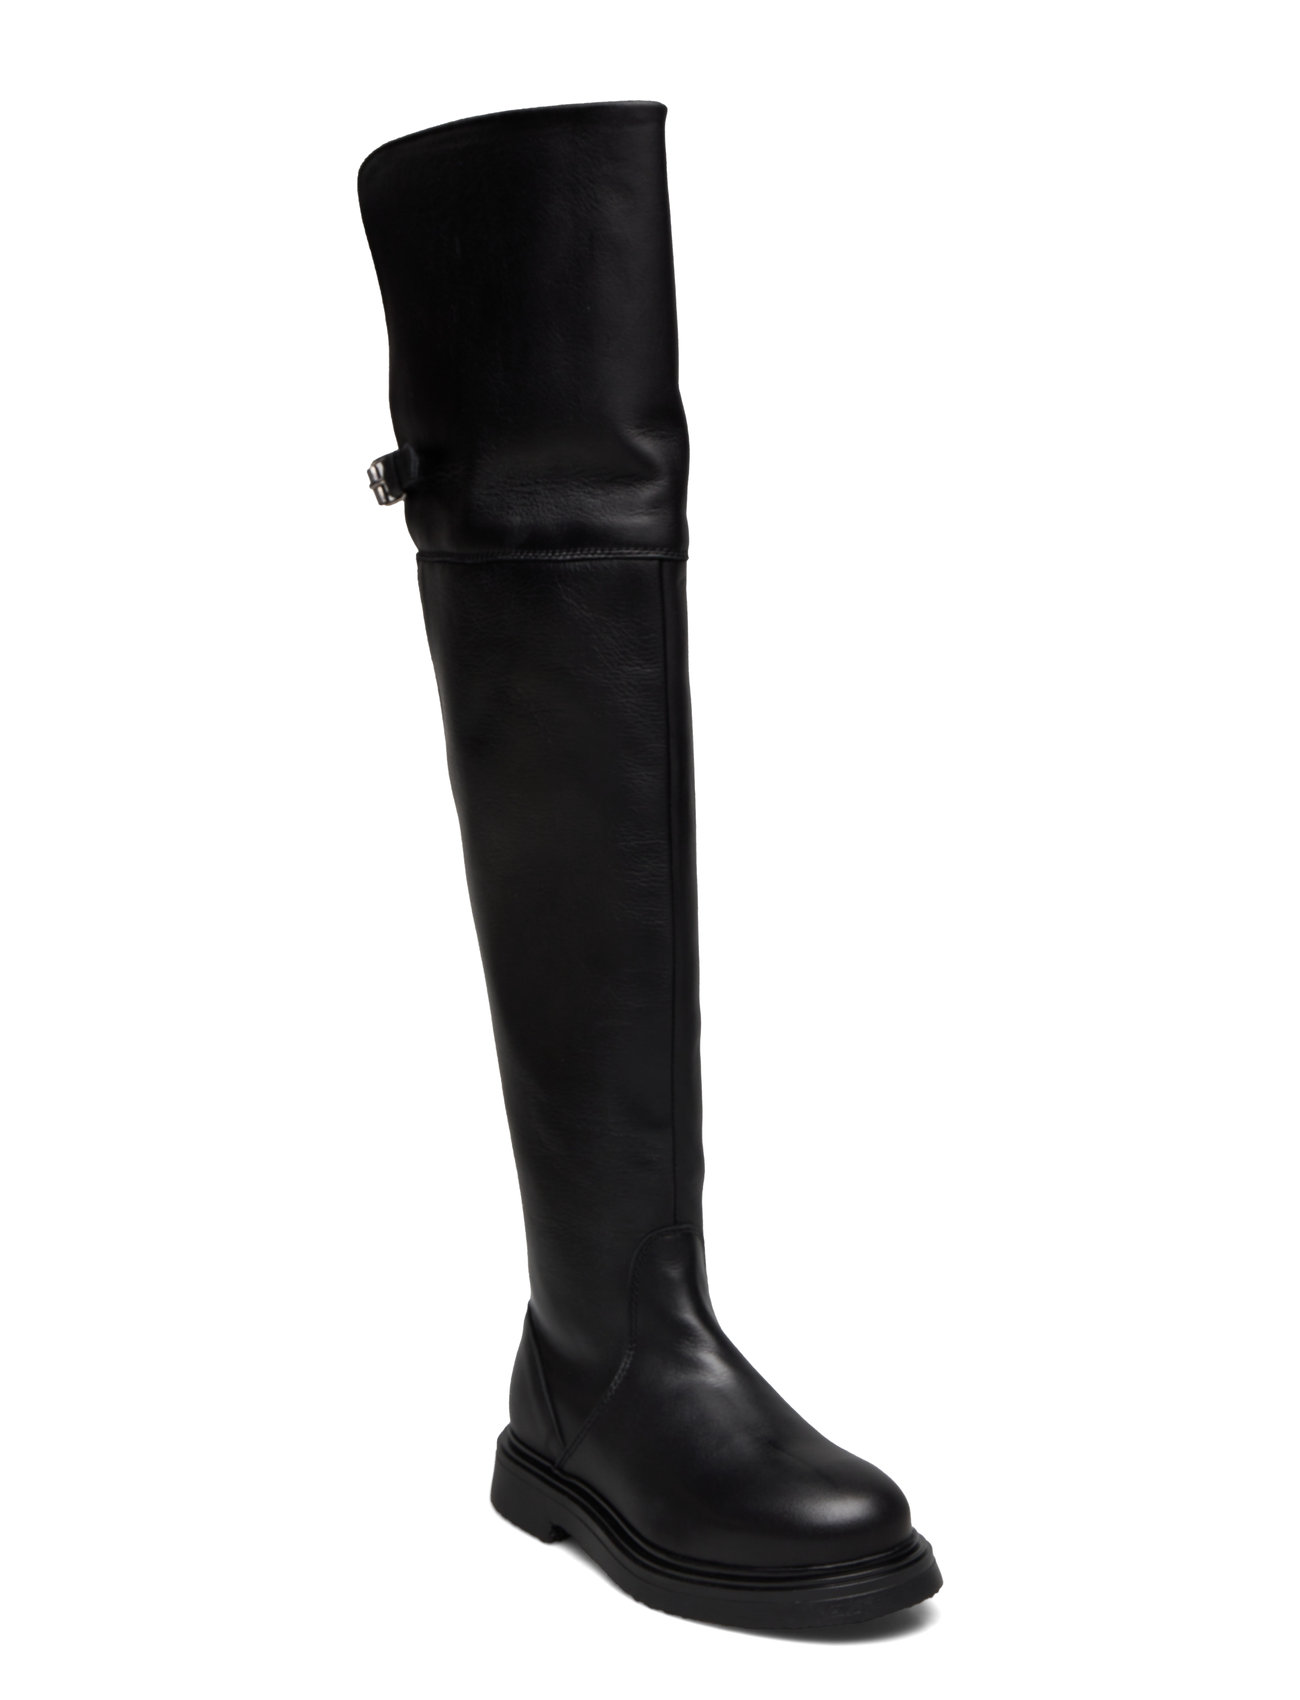 Gayle Shoes Boots Over-the-knee Black Pavement